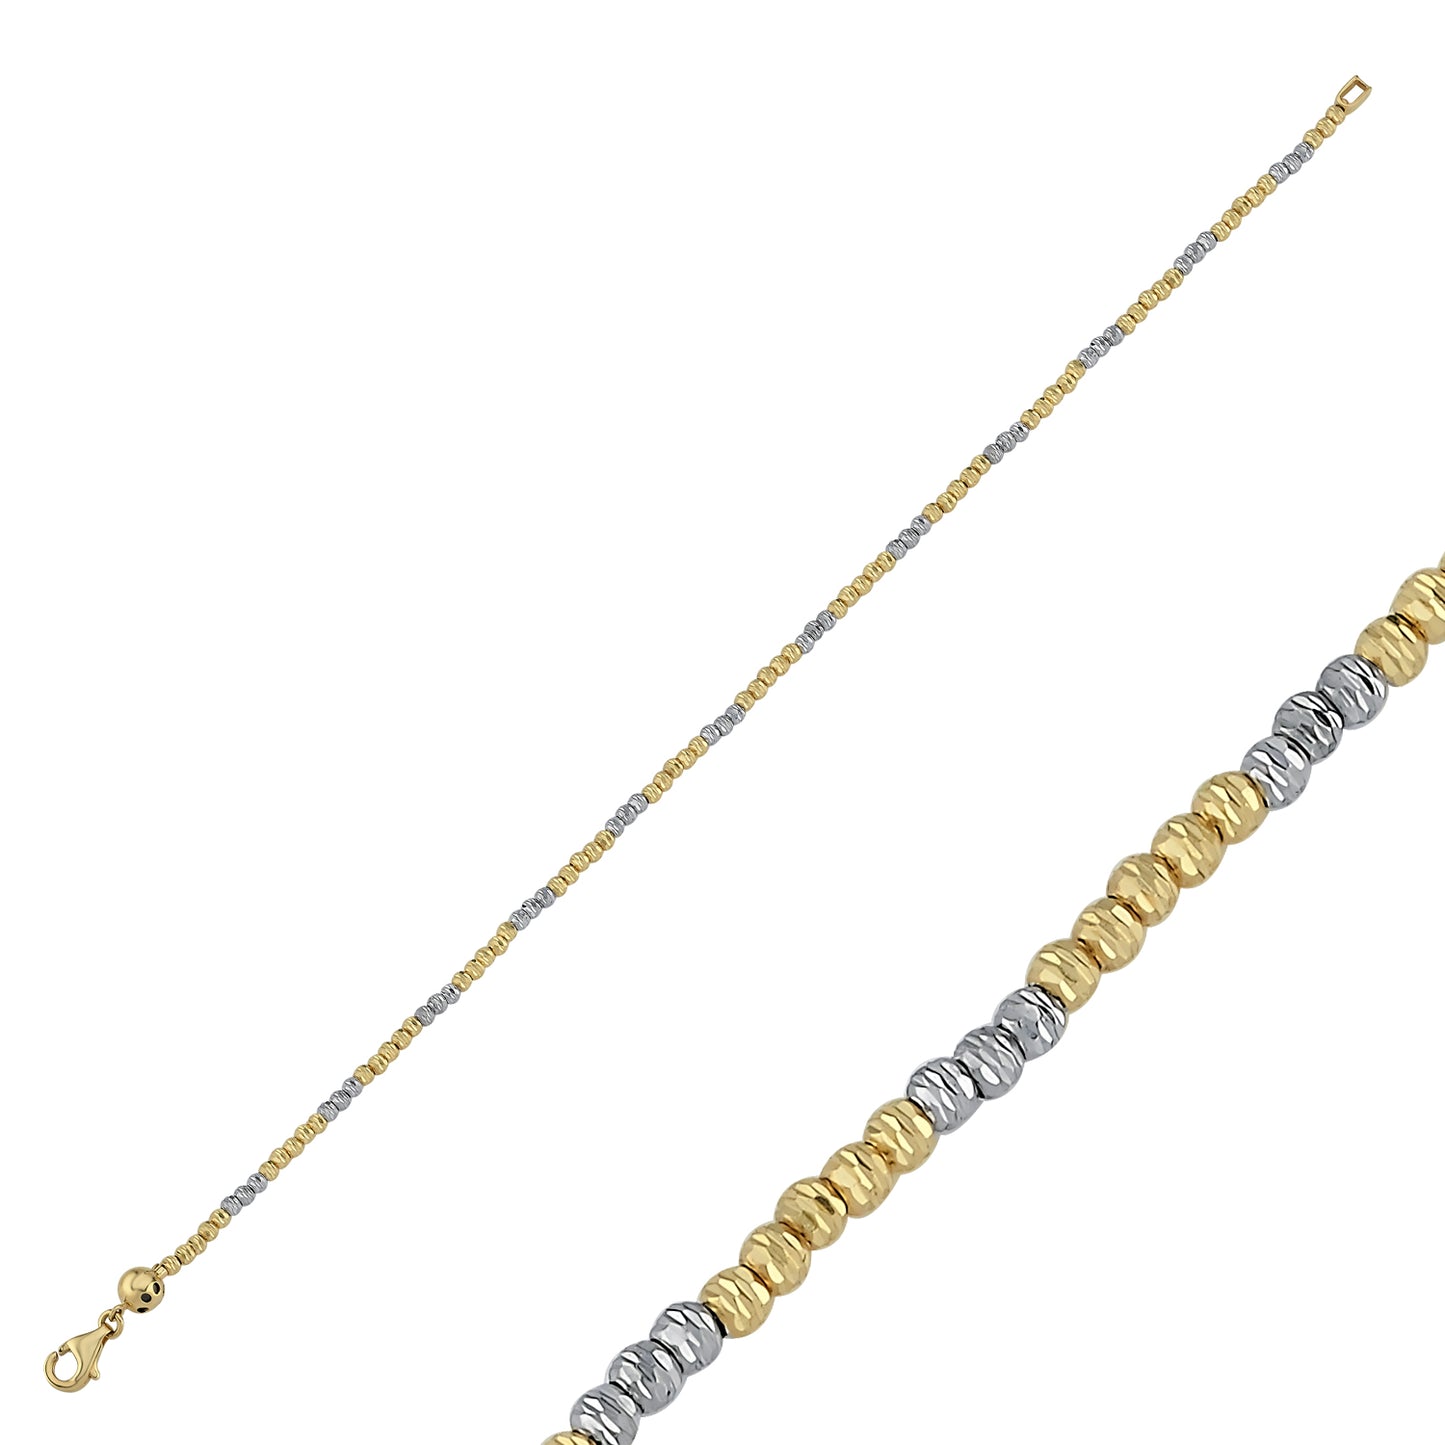 TWO GOLD COLOR BALL BOLD BRACELET